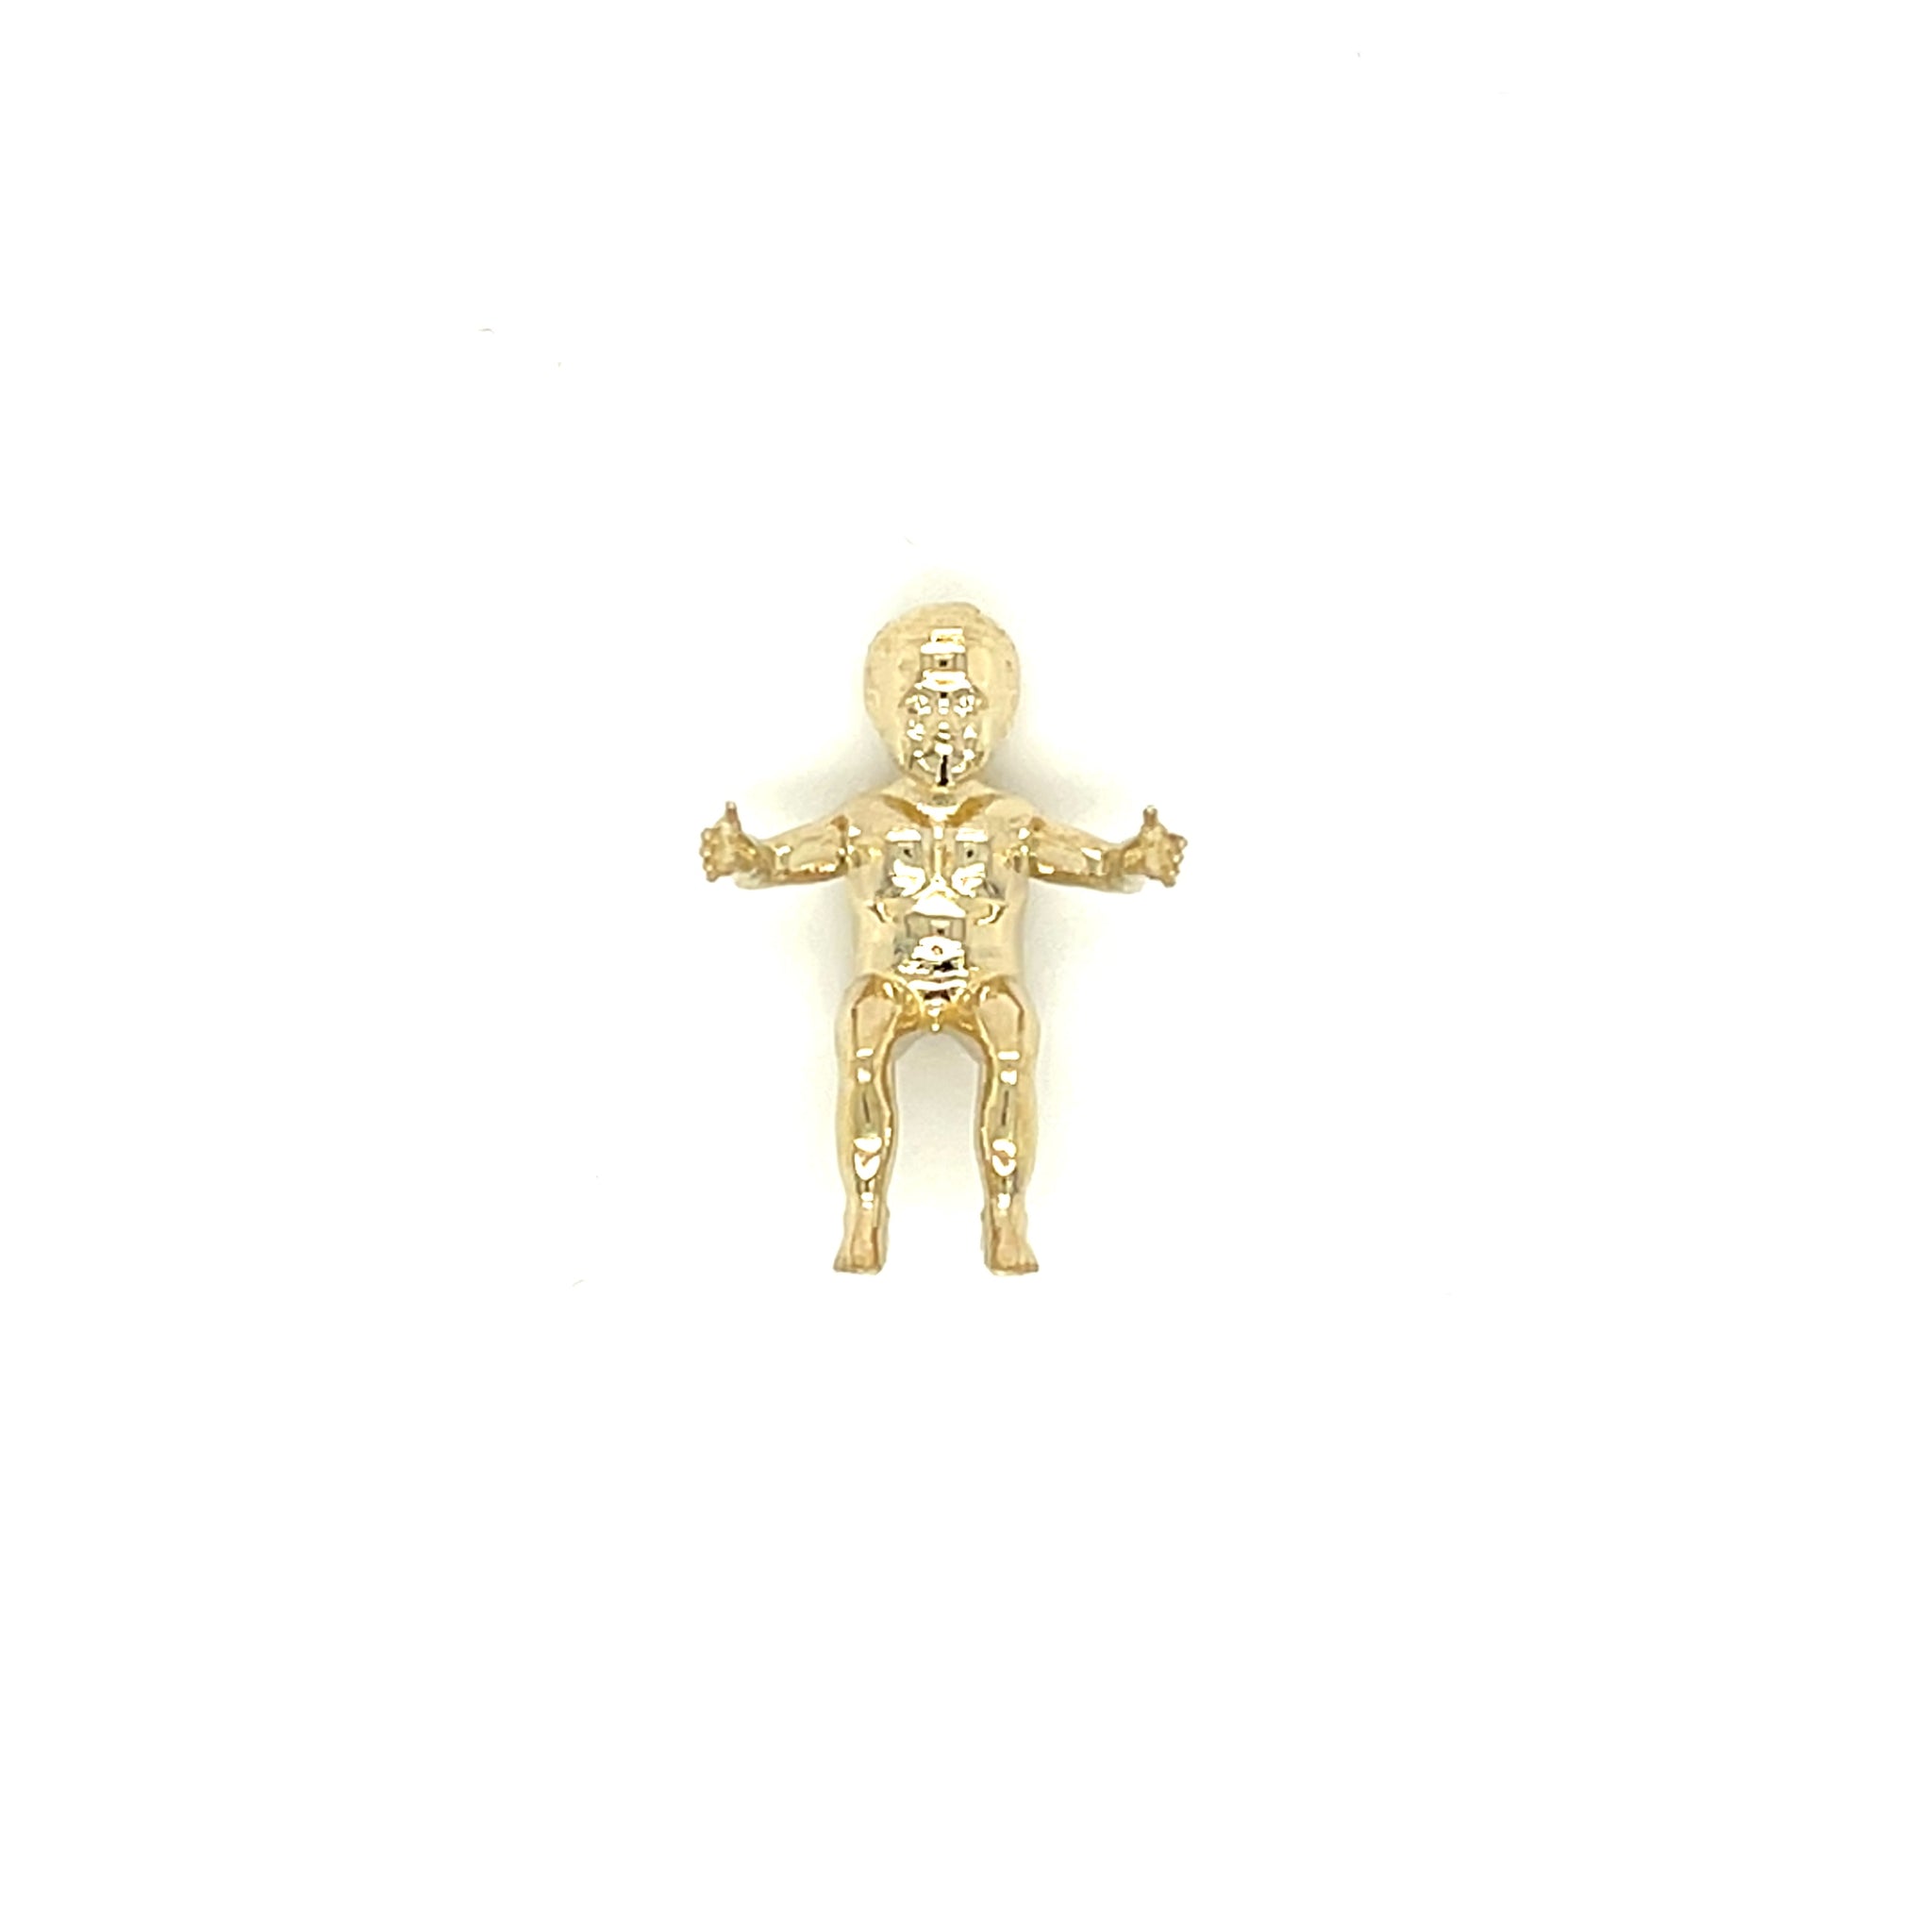 10k Yellow Gold Small Solid King Cake Baby